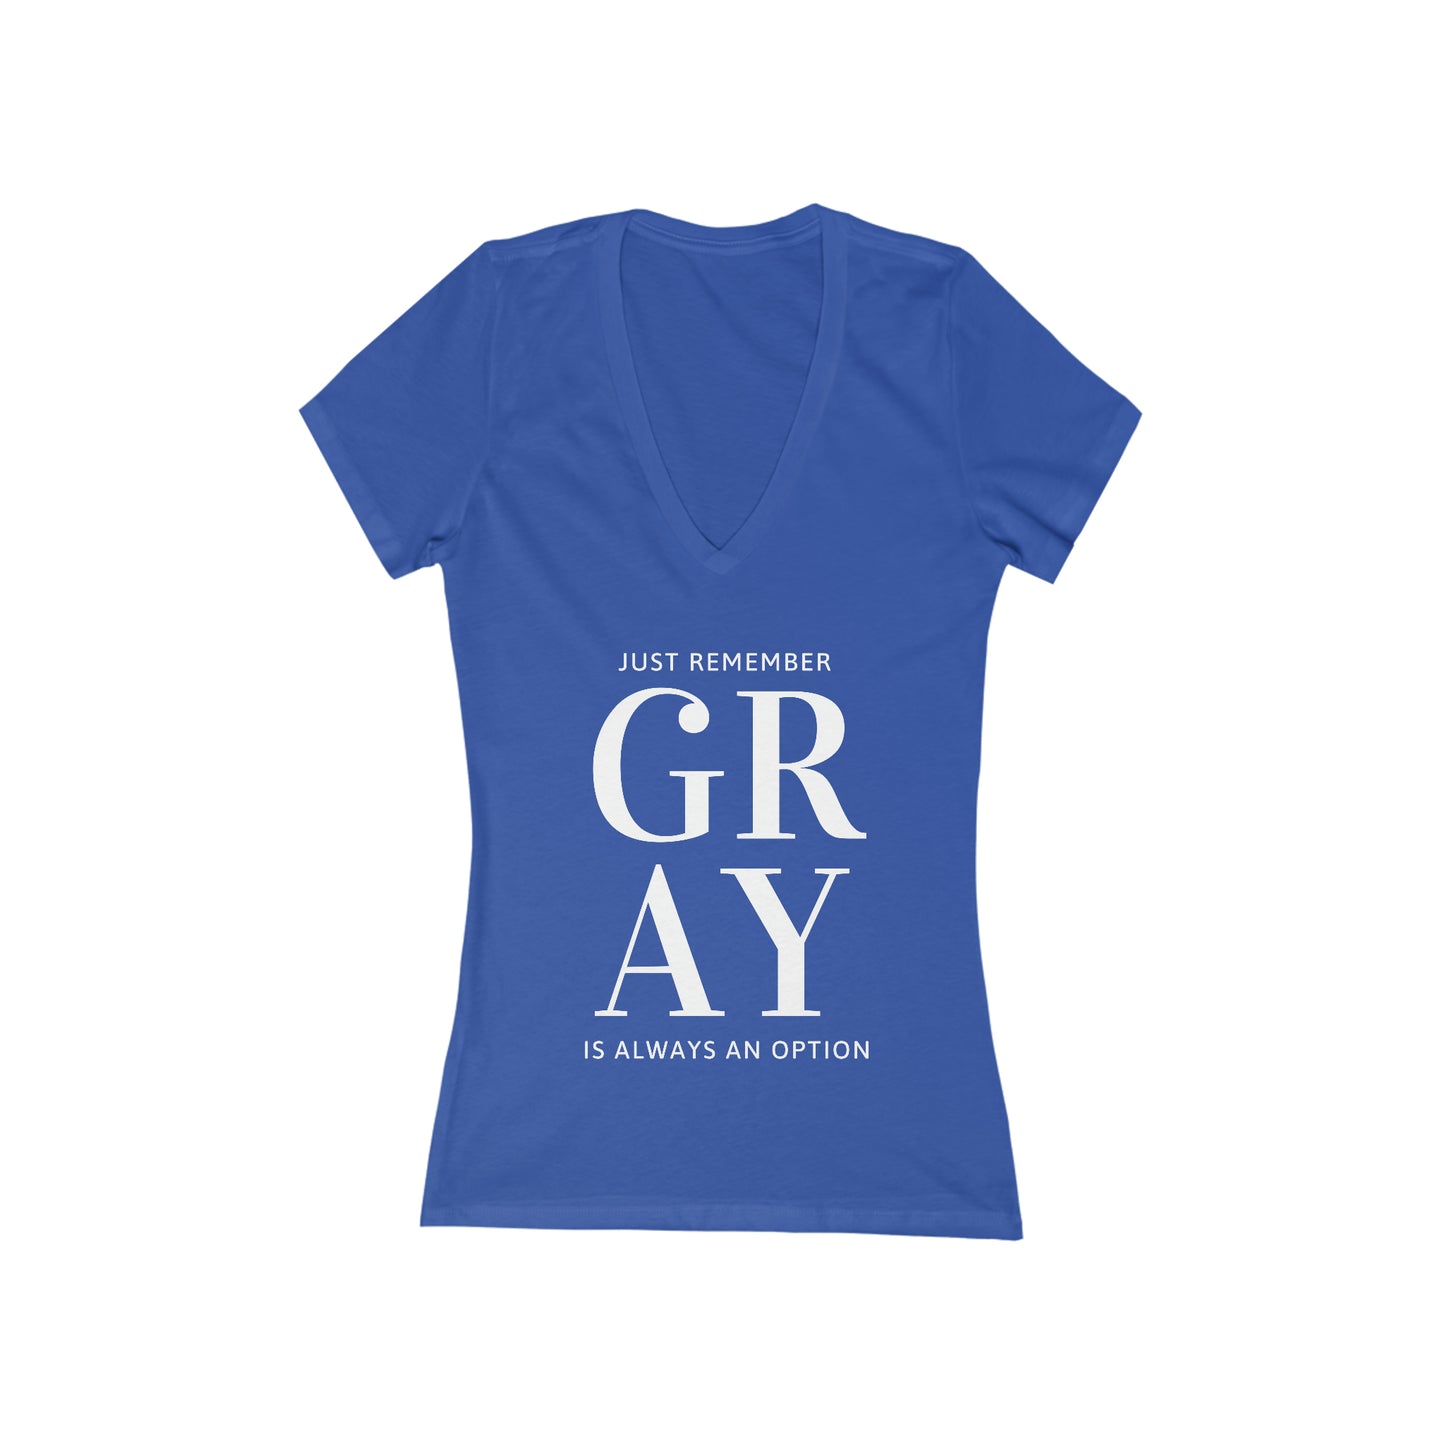 GRAY Is Always An Option, short sleeve deep v-neck t-shirt, for women embracing silver and gray hair